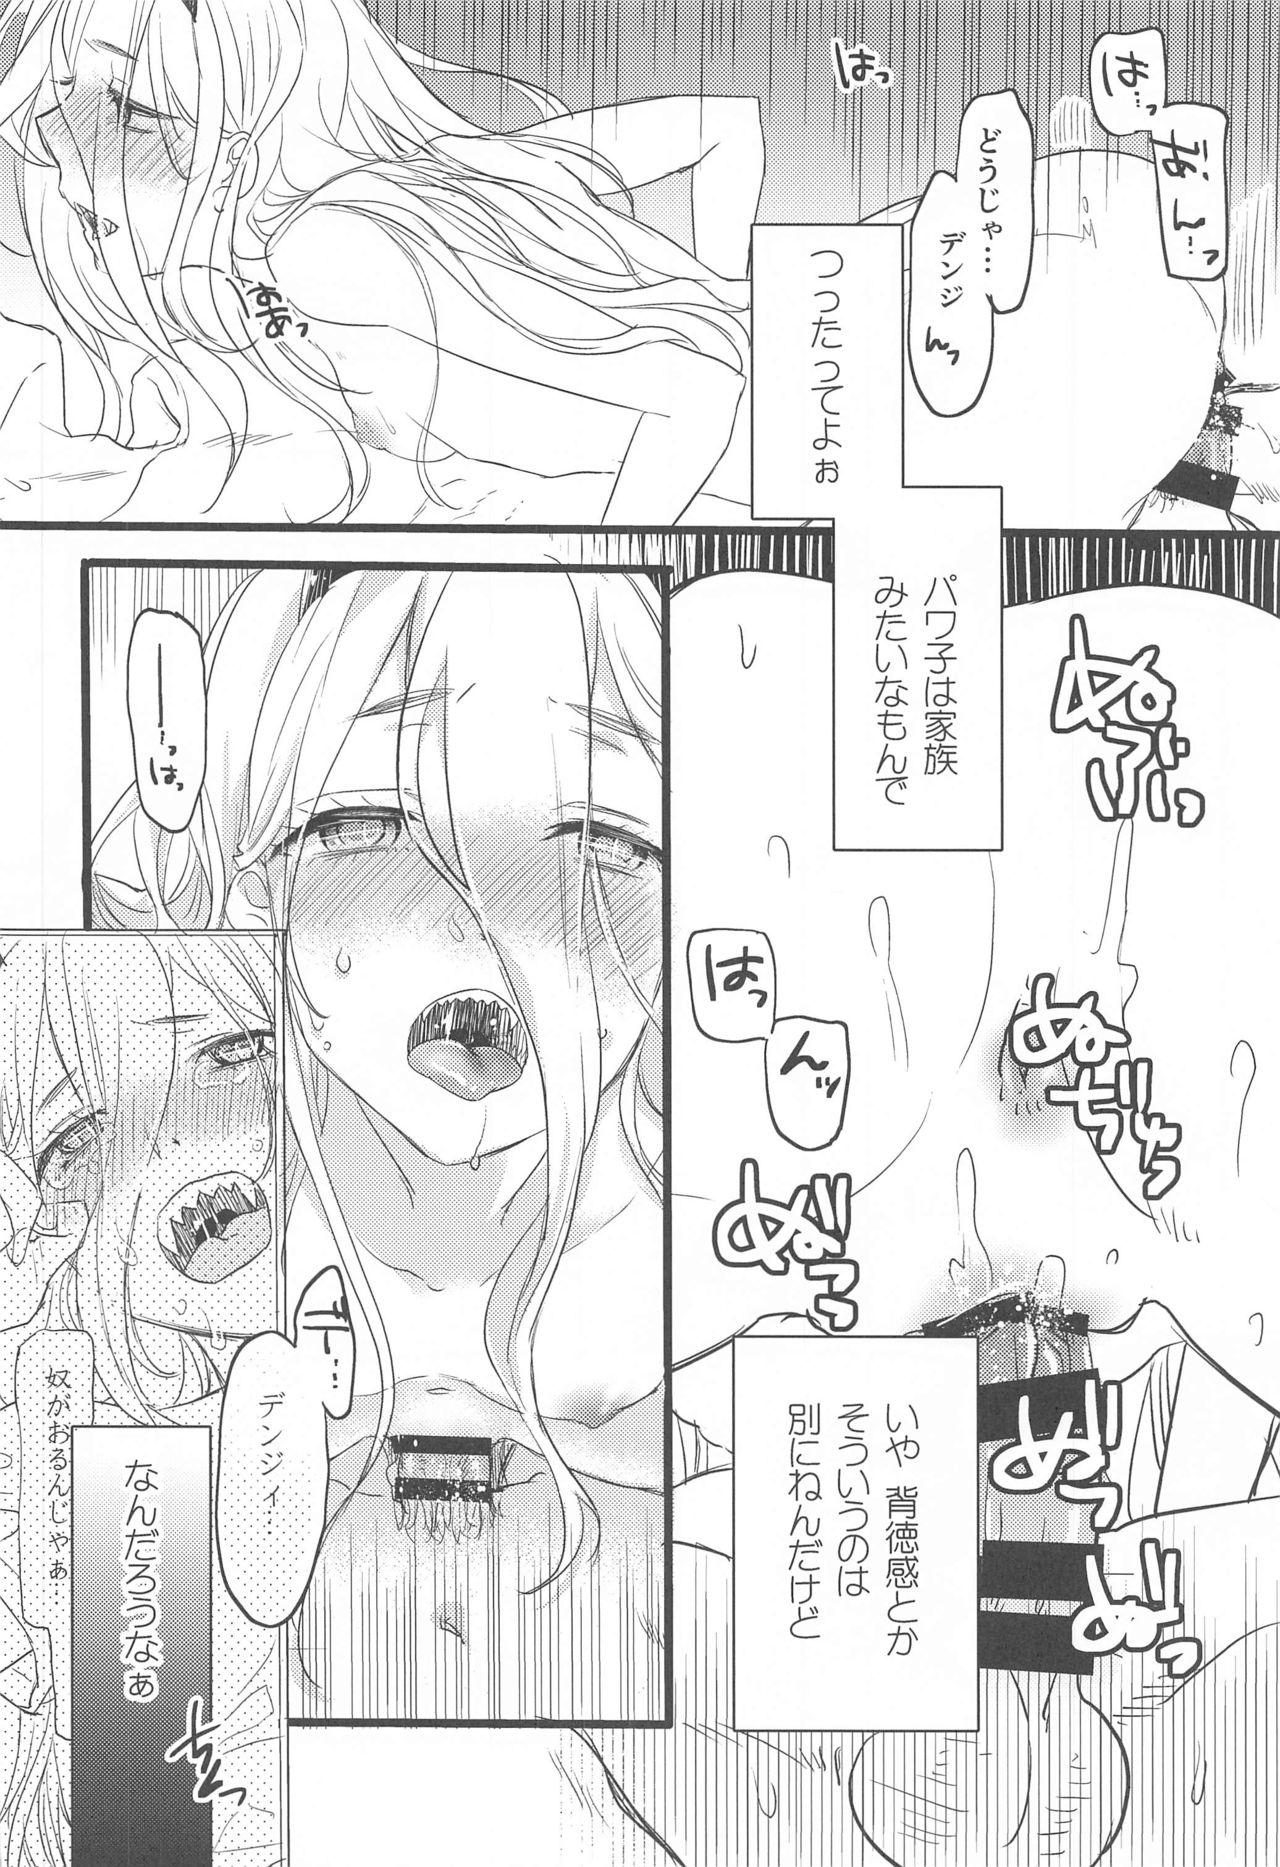 Argentina Like a Cats - Chainsaw man Naked Women Fucking - Page 5